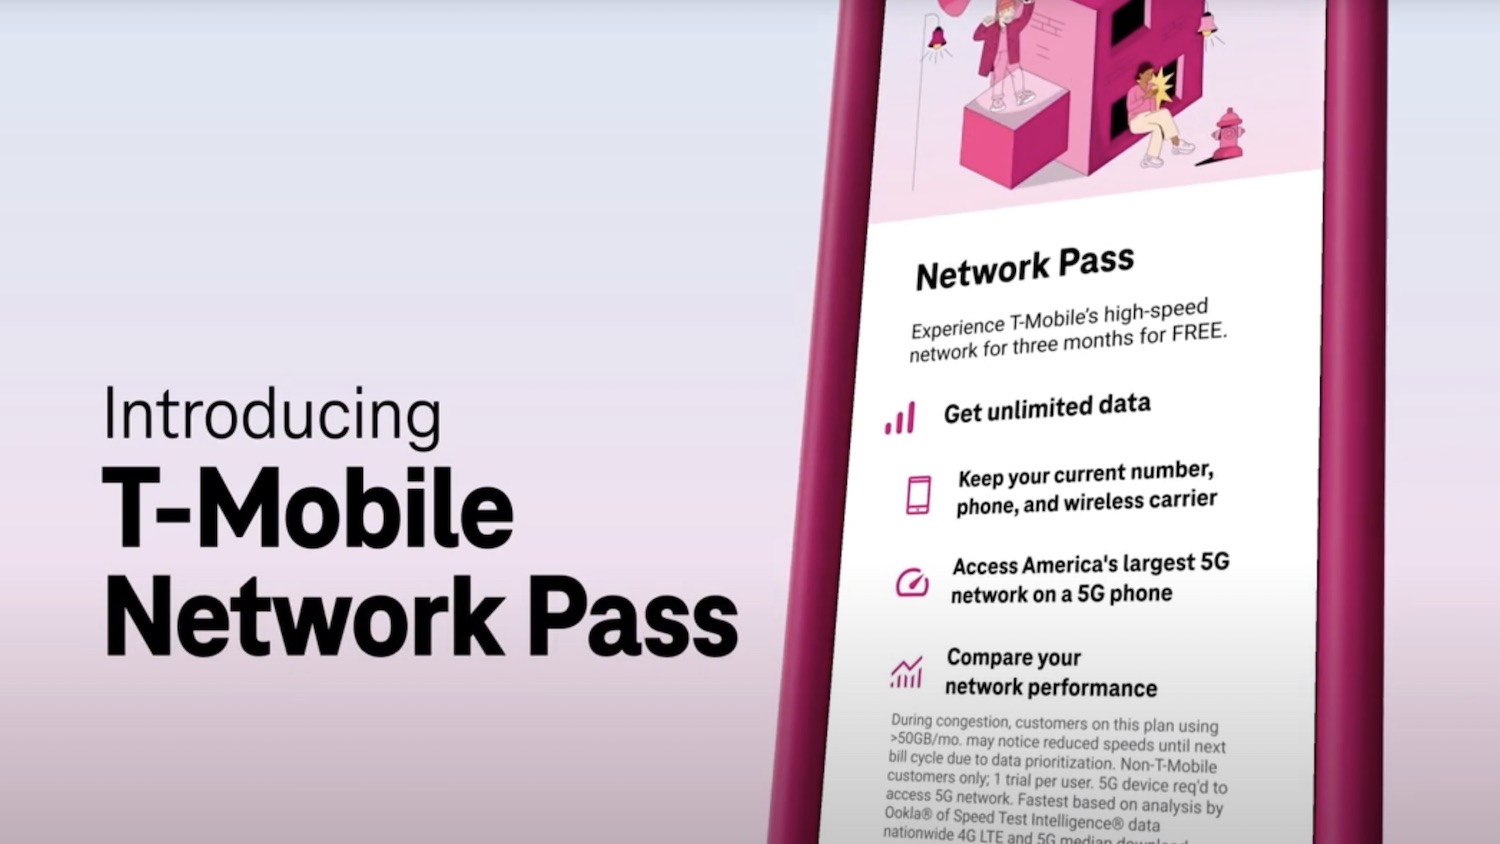 T-Mobile will now give you 3 months of unlimited data for free